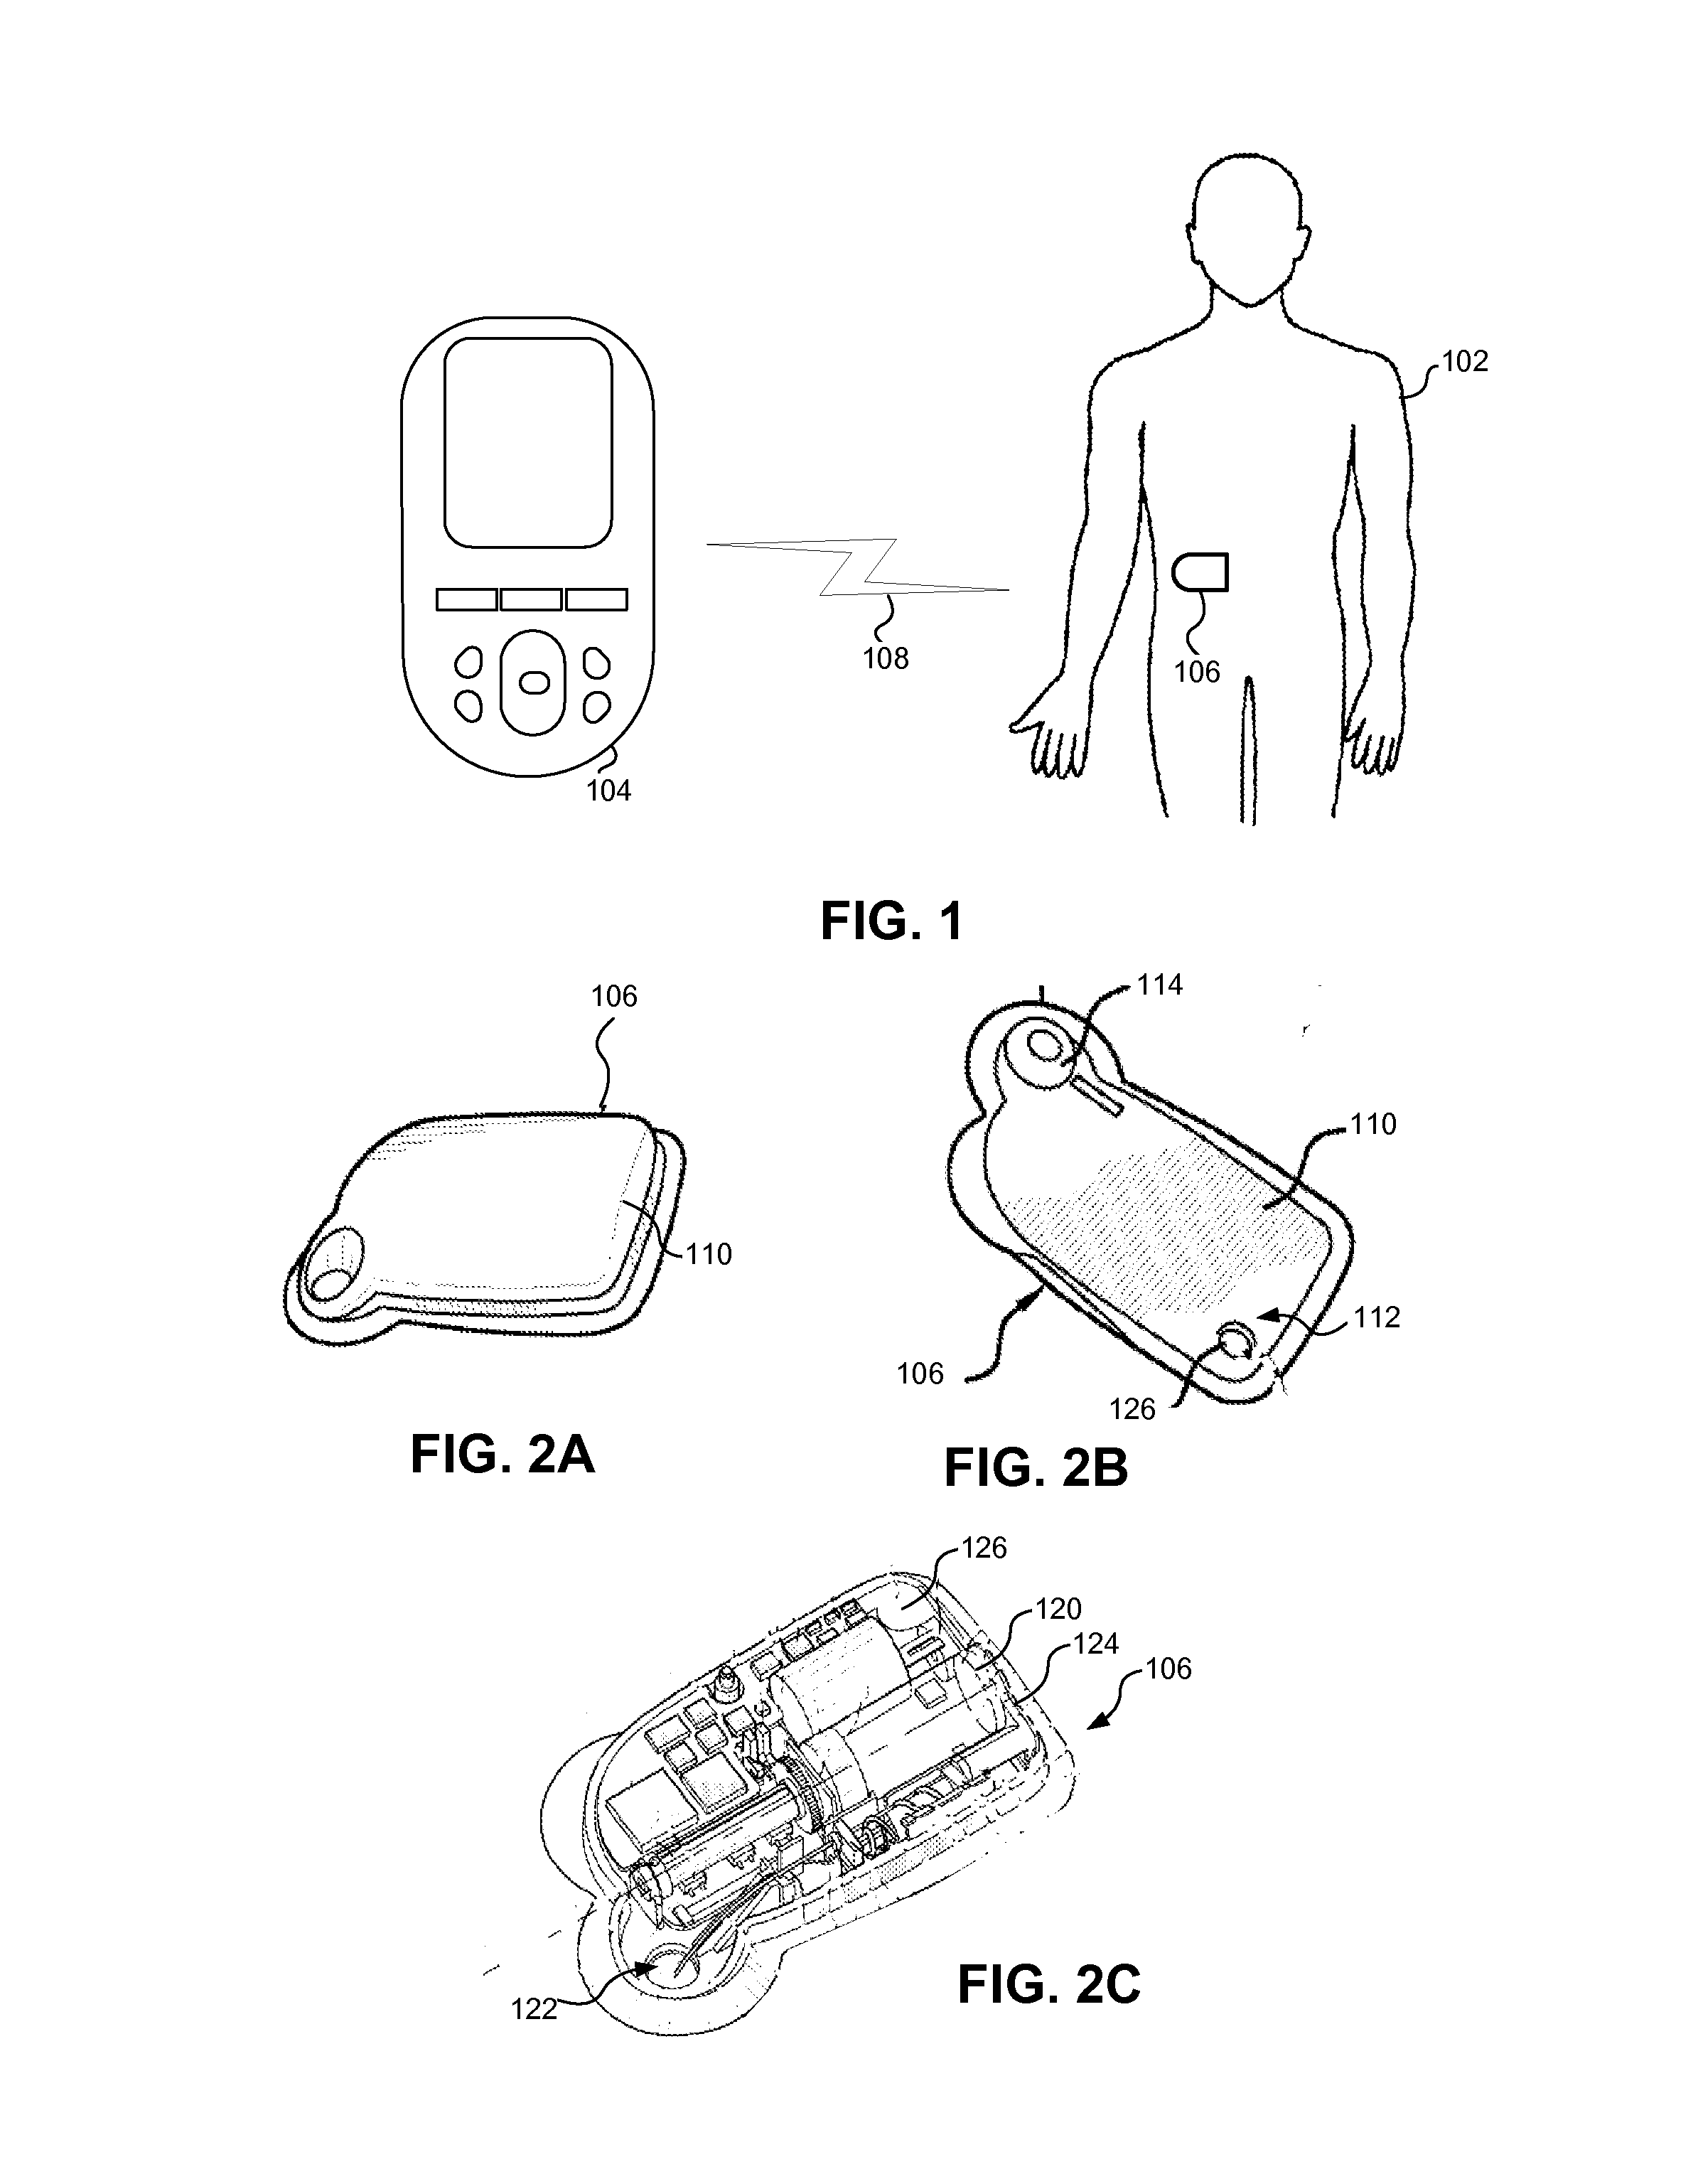 Interfacing a prefilled syringe with an infusion pump to fill the infusion pump